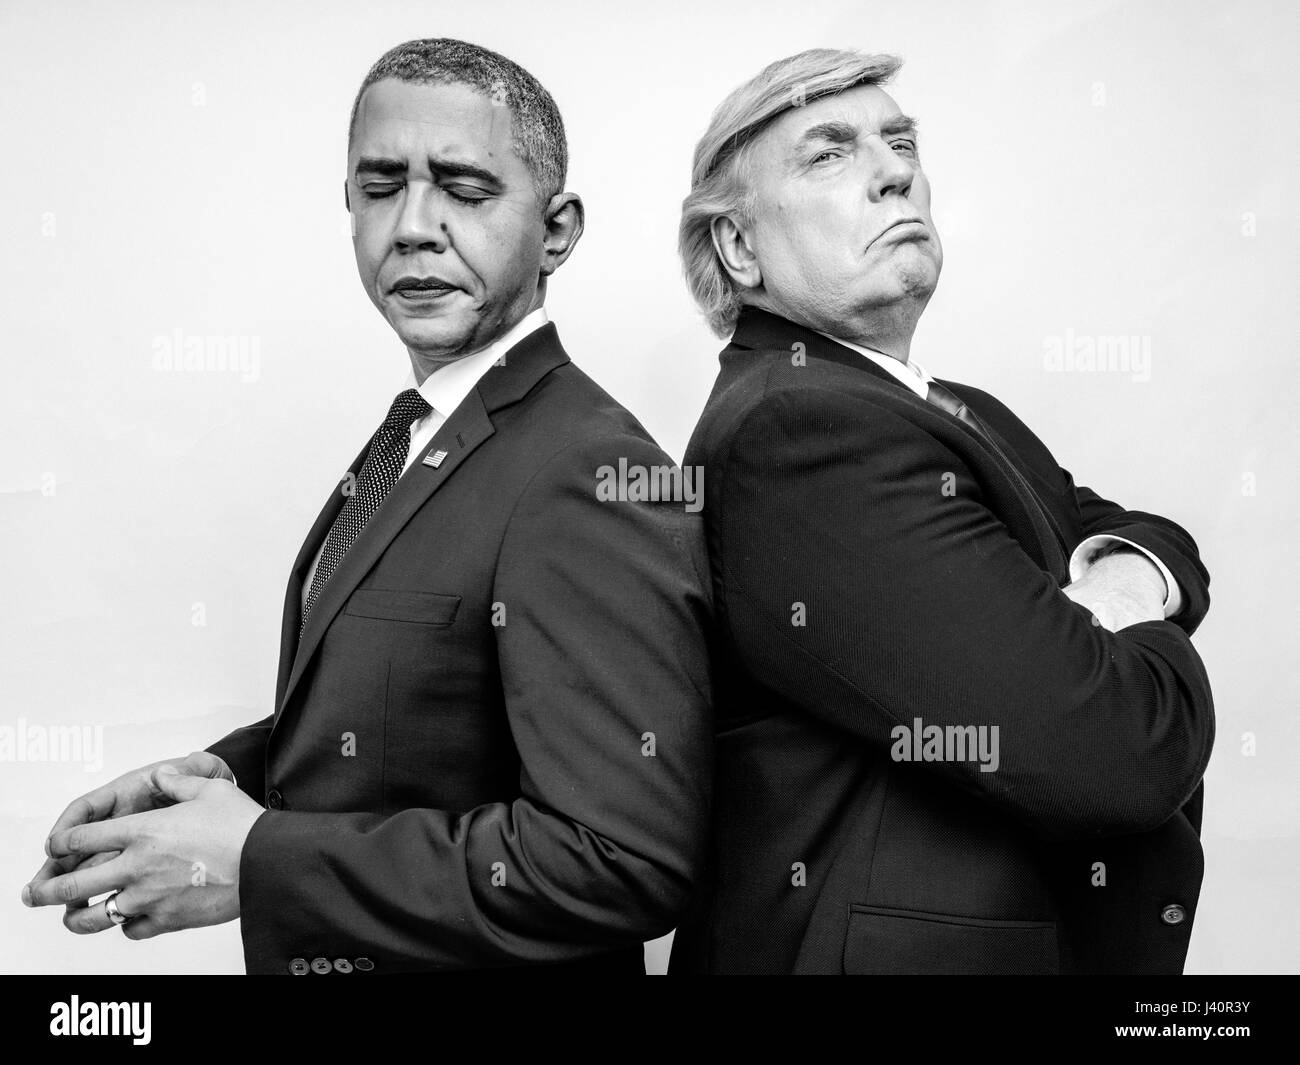 President Donald J Trump and President Obama lookalikes meet for a studio shoot in Hong Kong. Stock Photo